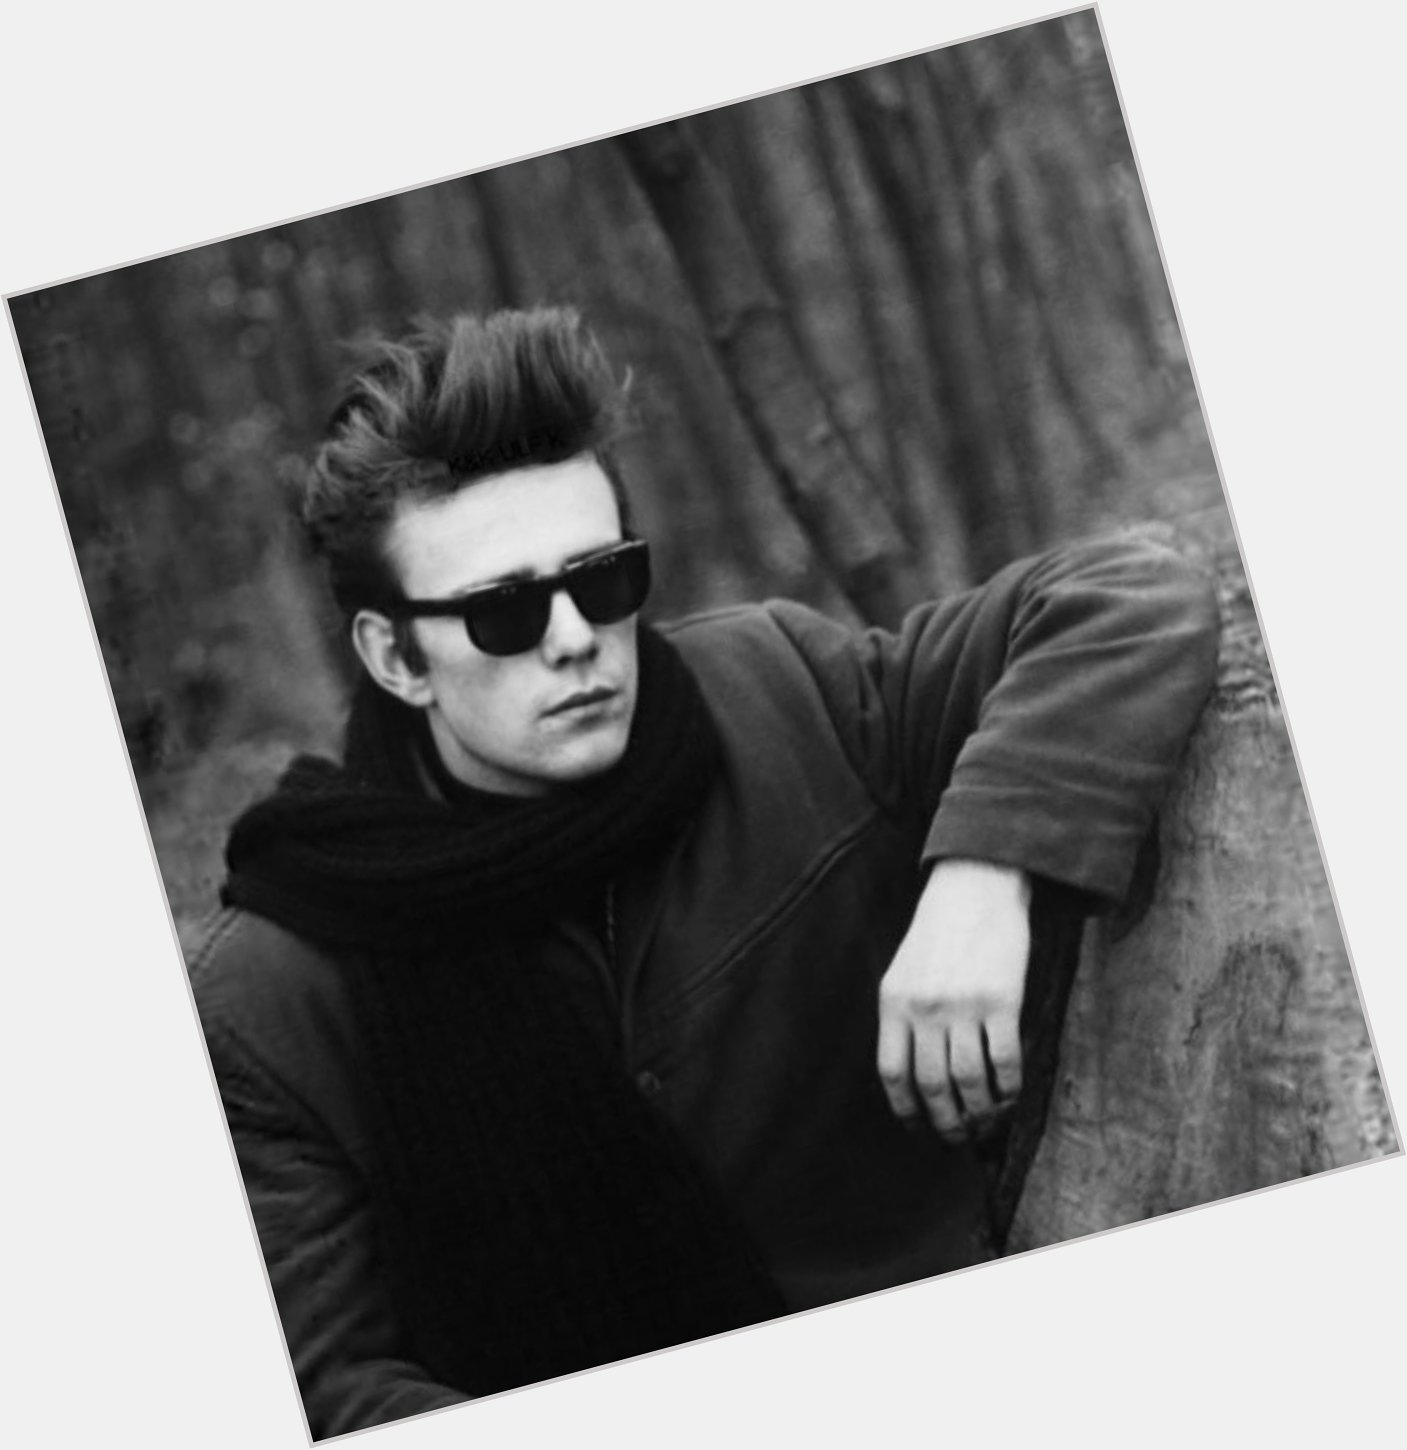 1940
Stuart Sutcliffe is born on this day 

Wherever you are...Happy birthday Stu 